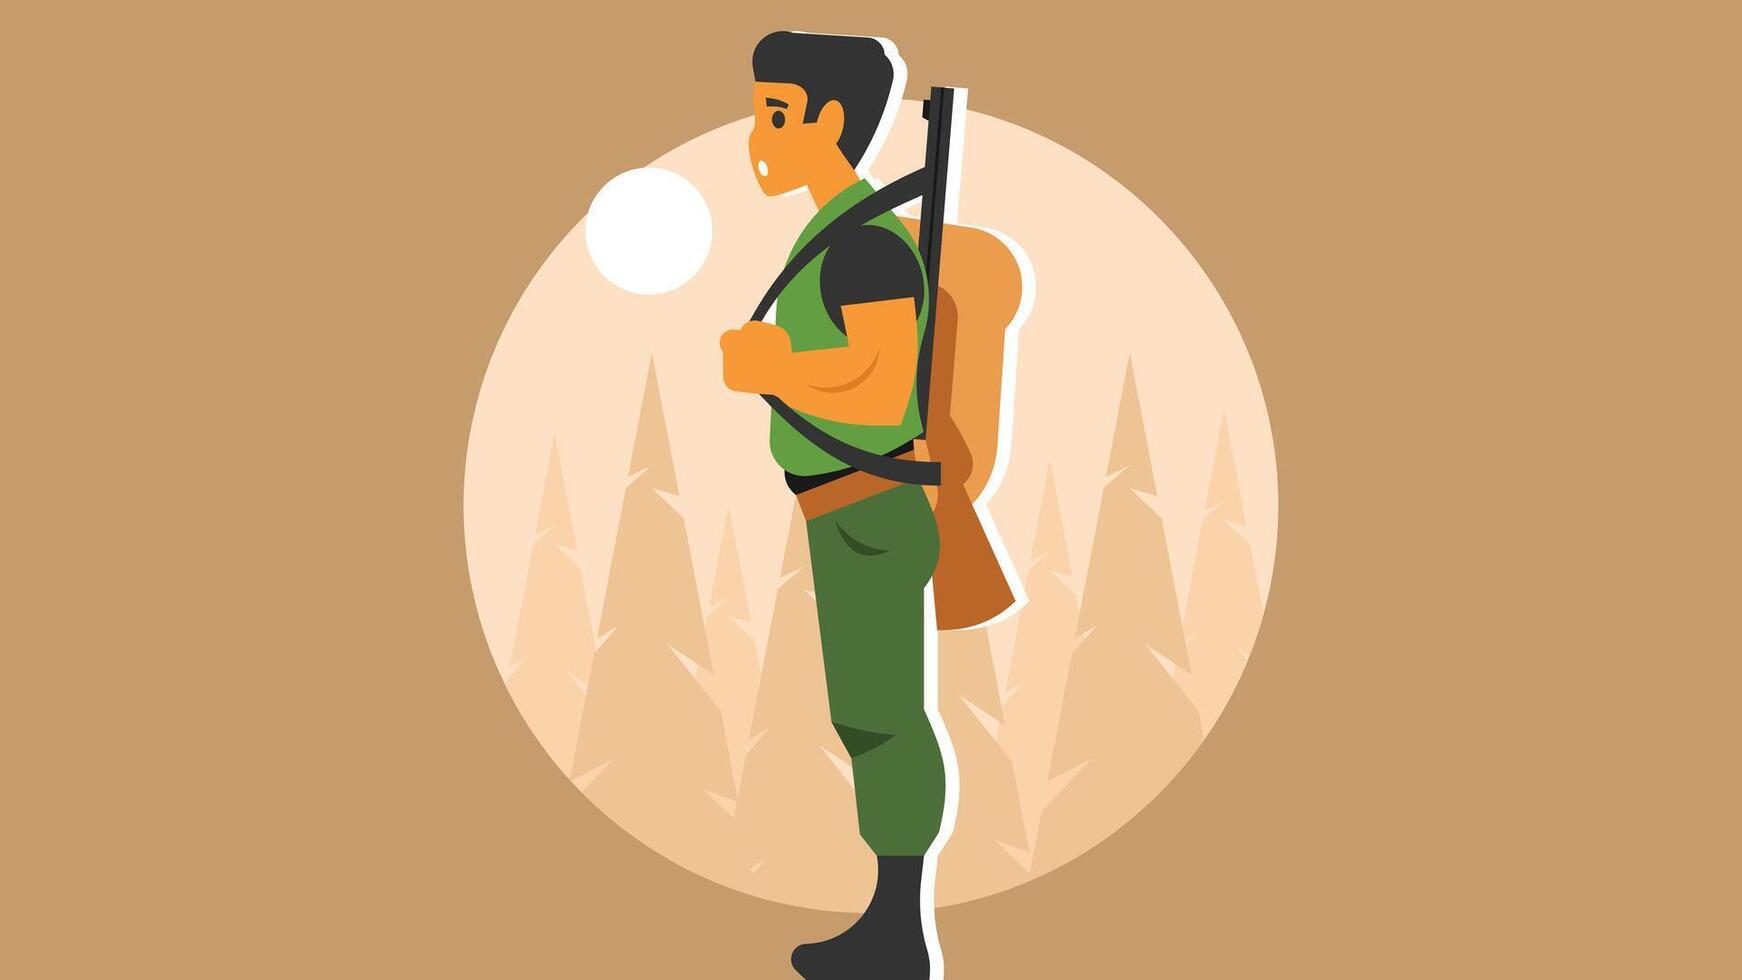 a hunter carries a gun going for hunt season in the nature illustration vector